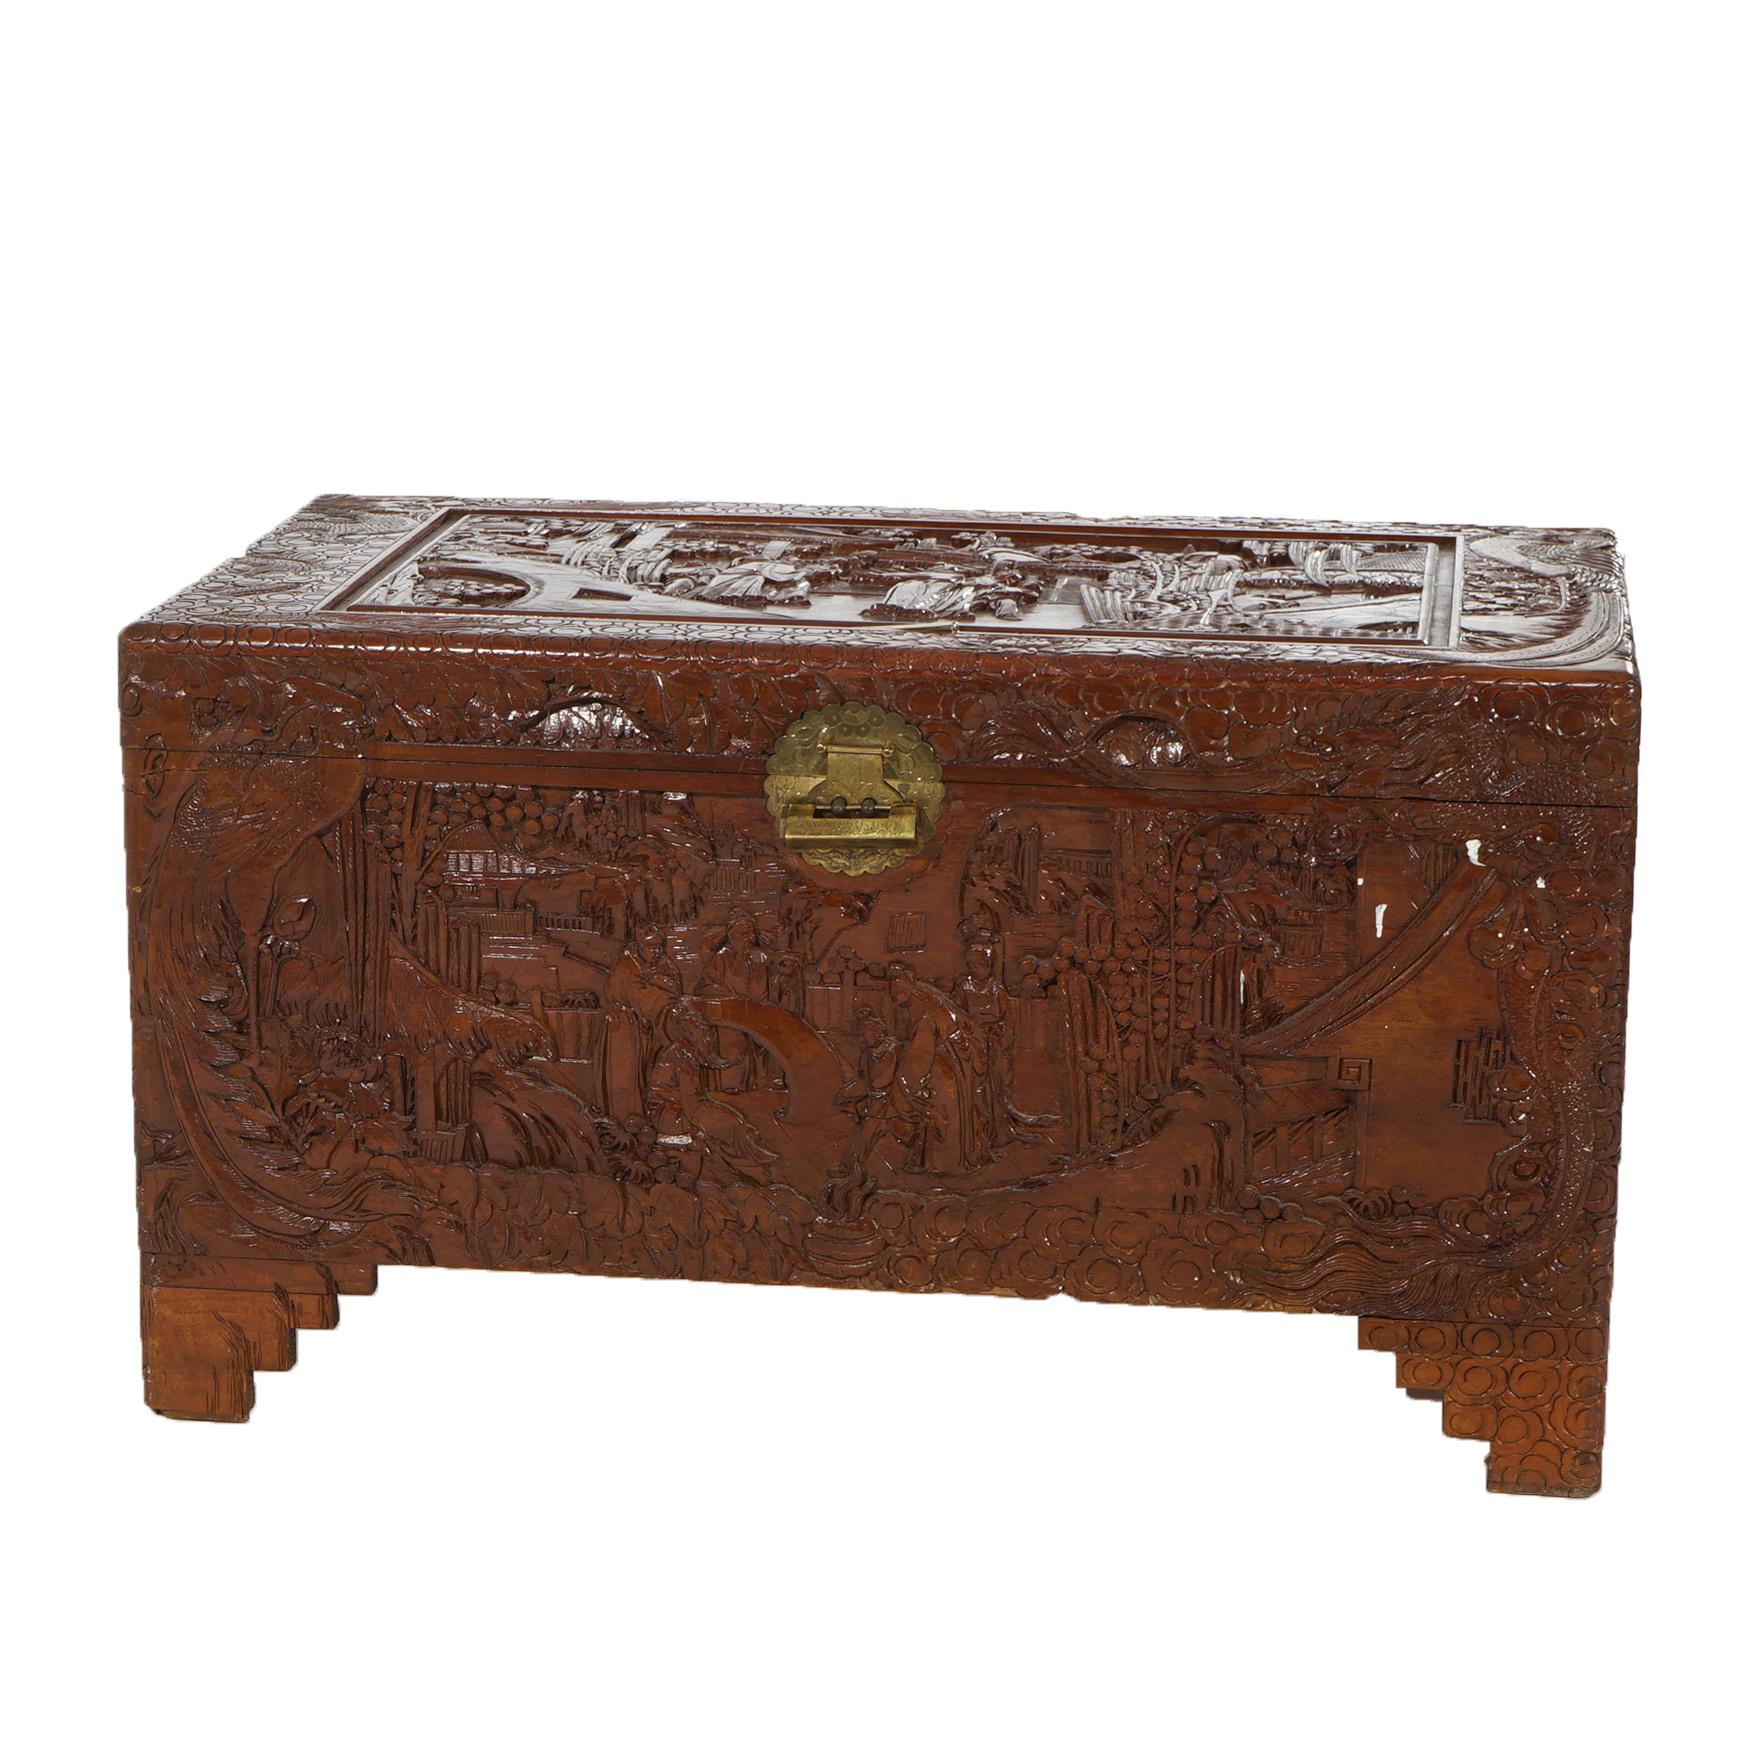 ***Ask About Reduced In-House Delivery Rates - Reliable Professional Service & Fully Insured***
Chinese Deeply Carved Hardwood Figural Blanket Chest with Village Scene in Relief and Brass Hardware, Raised on Stylized Bracket Feet, 20thC

Measures-